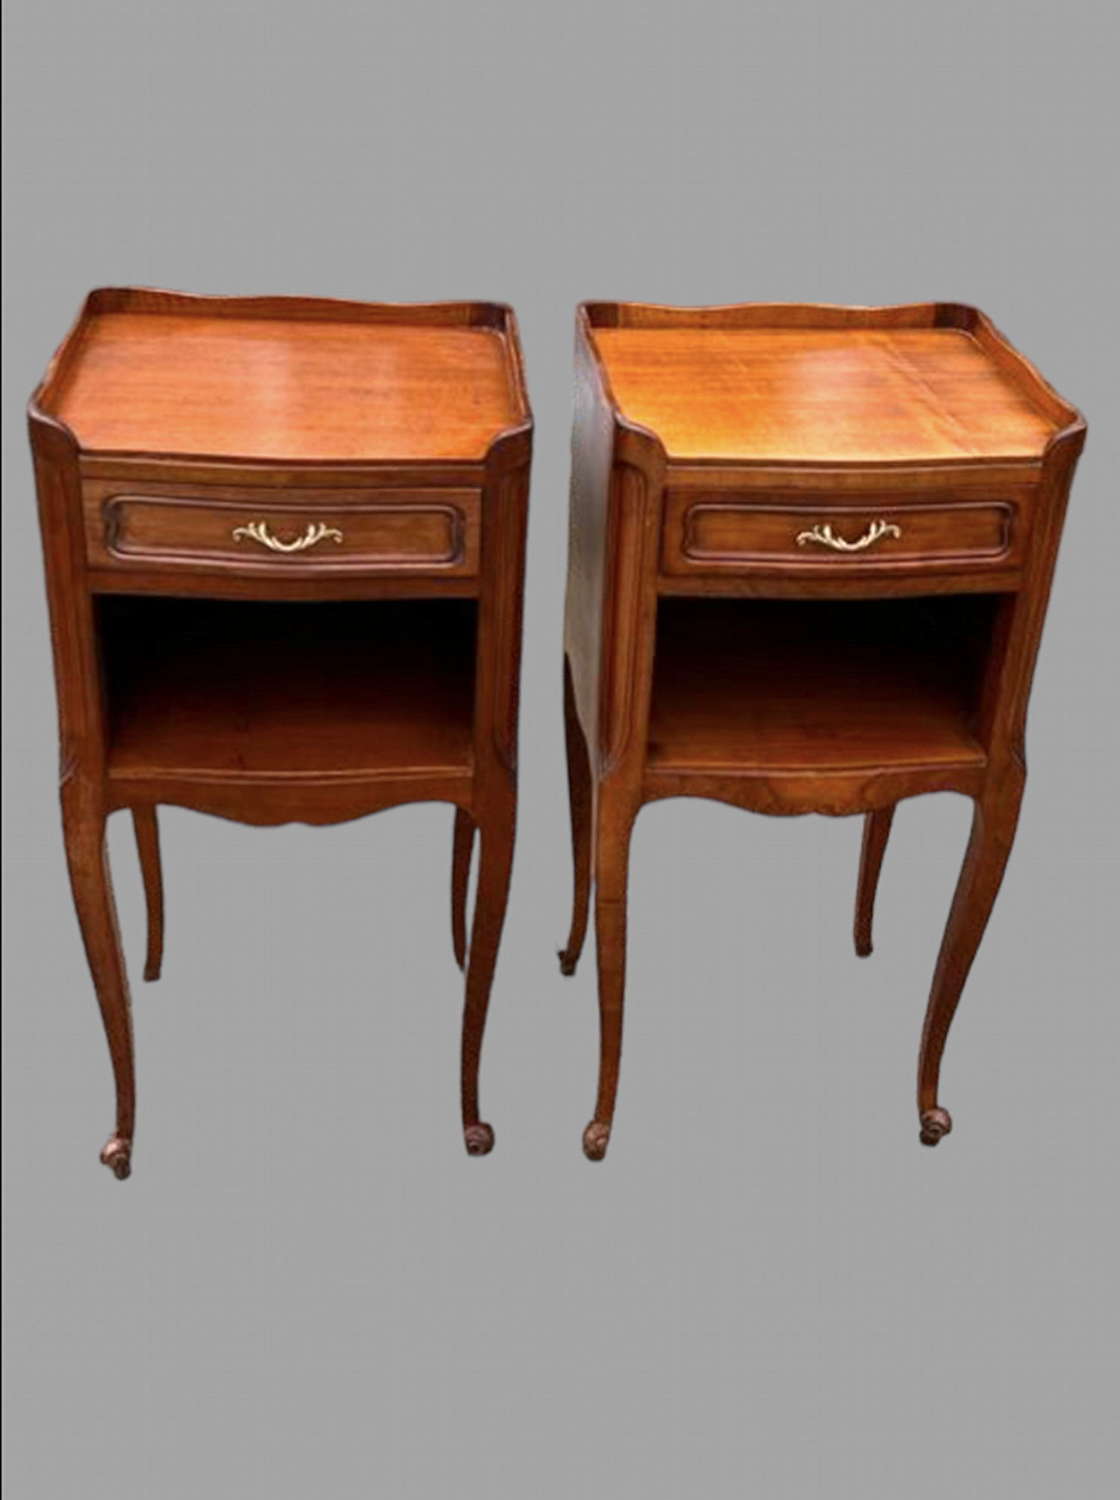 A Pair of Beechwood Bedside Tables